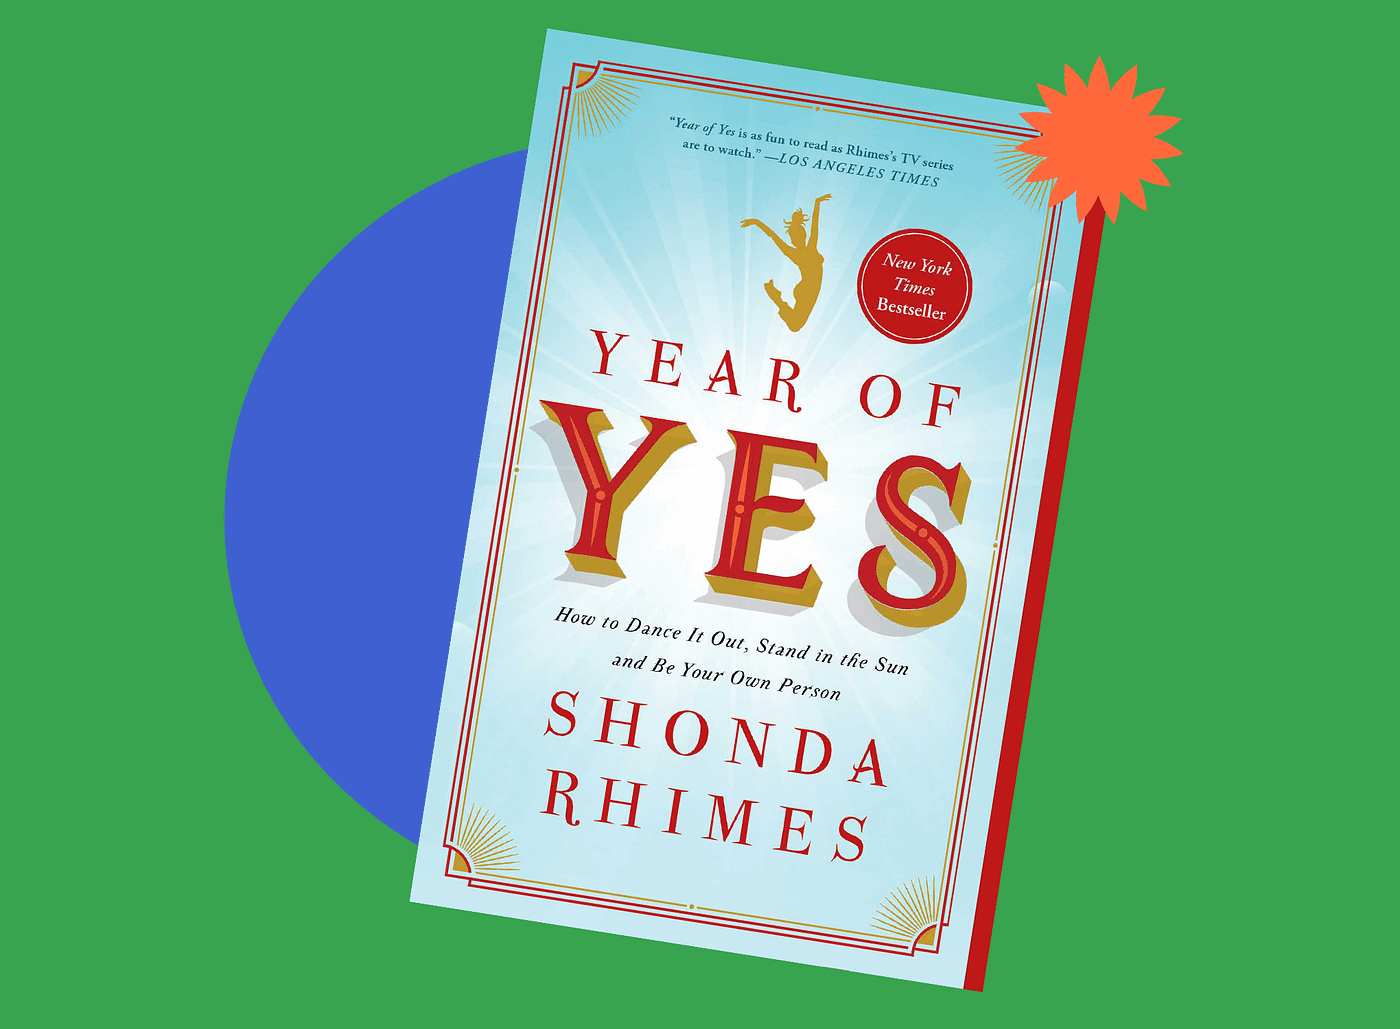 Year of Yes: How to Dance It Out, Stand In the Sun and Be Your Own Person  by Shonda Rhimes, Paperback